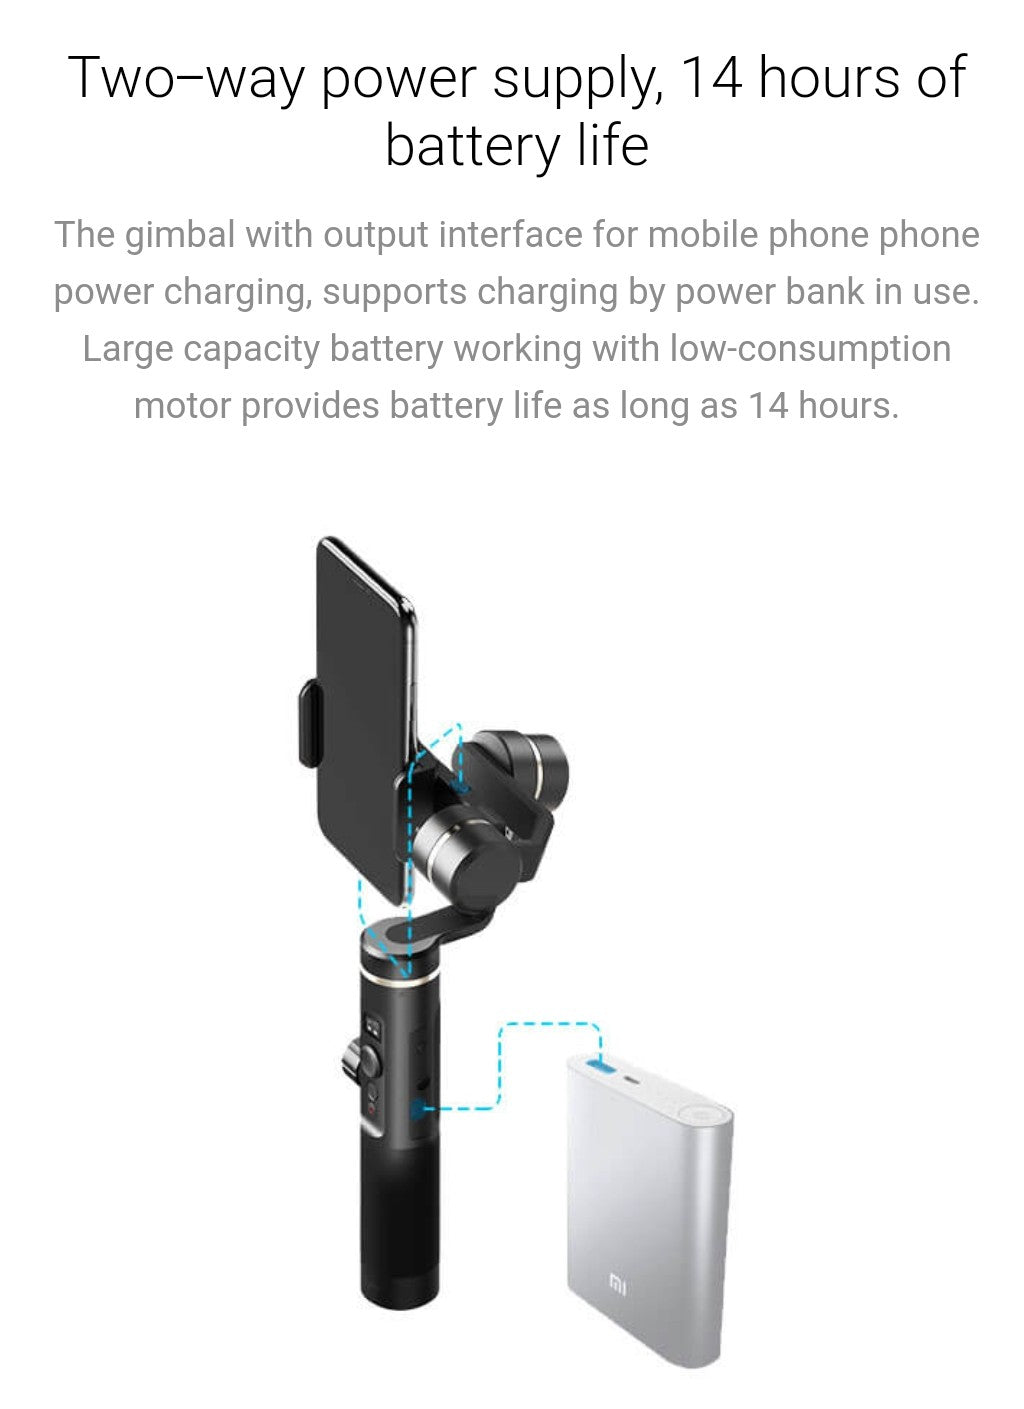 FeiyuTech SPG2 FREE Extension Pole (Smartphone Gimbal Stabilizer) - 1 Year Local Warranty